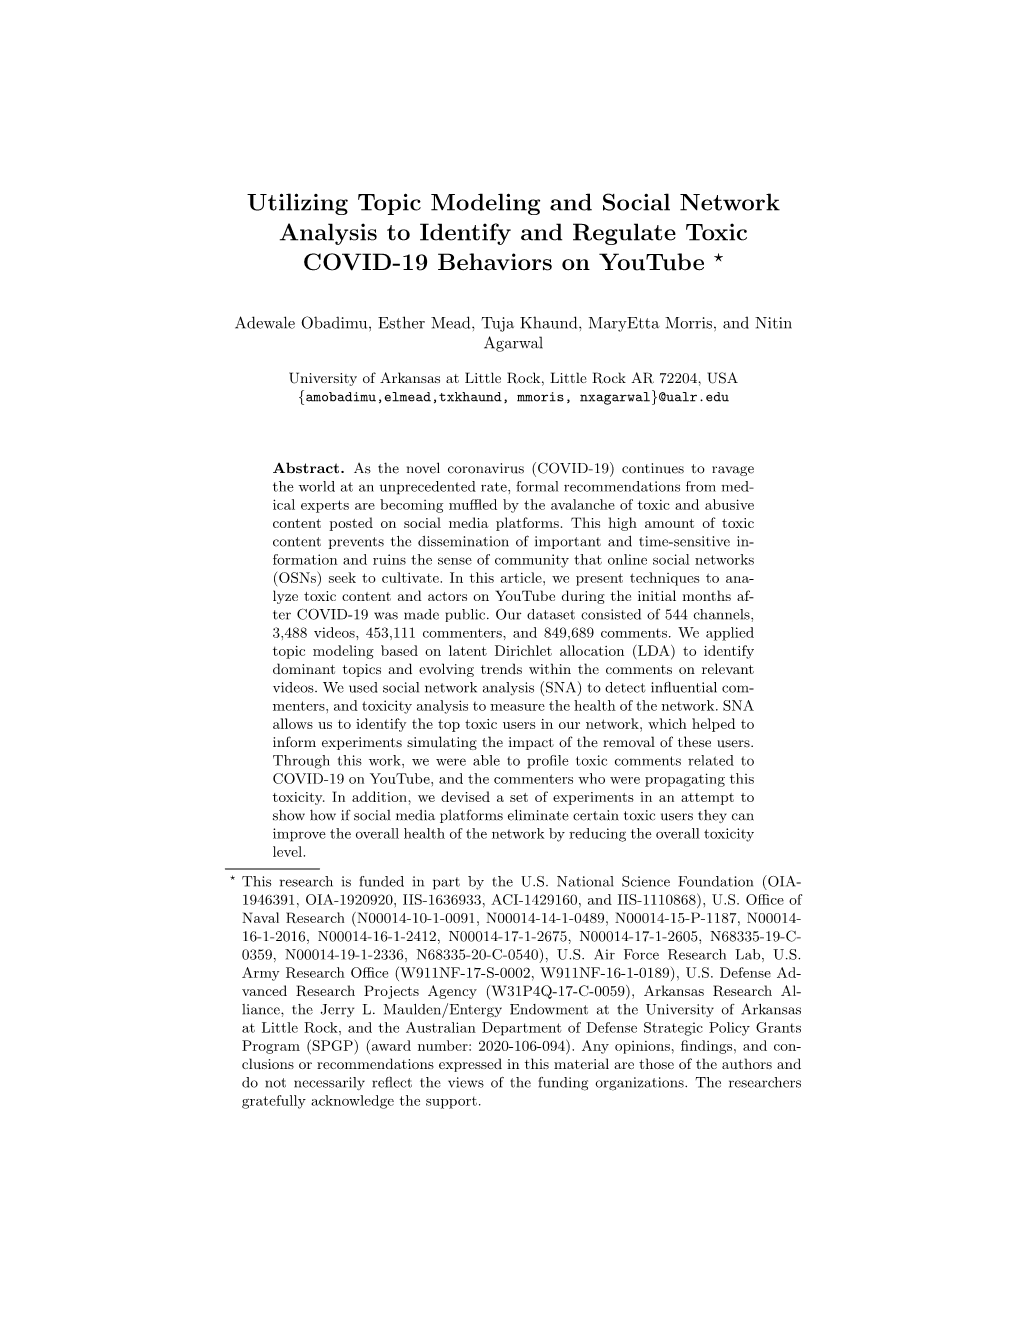 Utilizing Topic Modeling and Social Network Analysis to Identify and Regulate Toxic COVID-19 Behaviors on Youtube ?